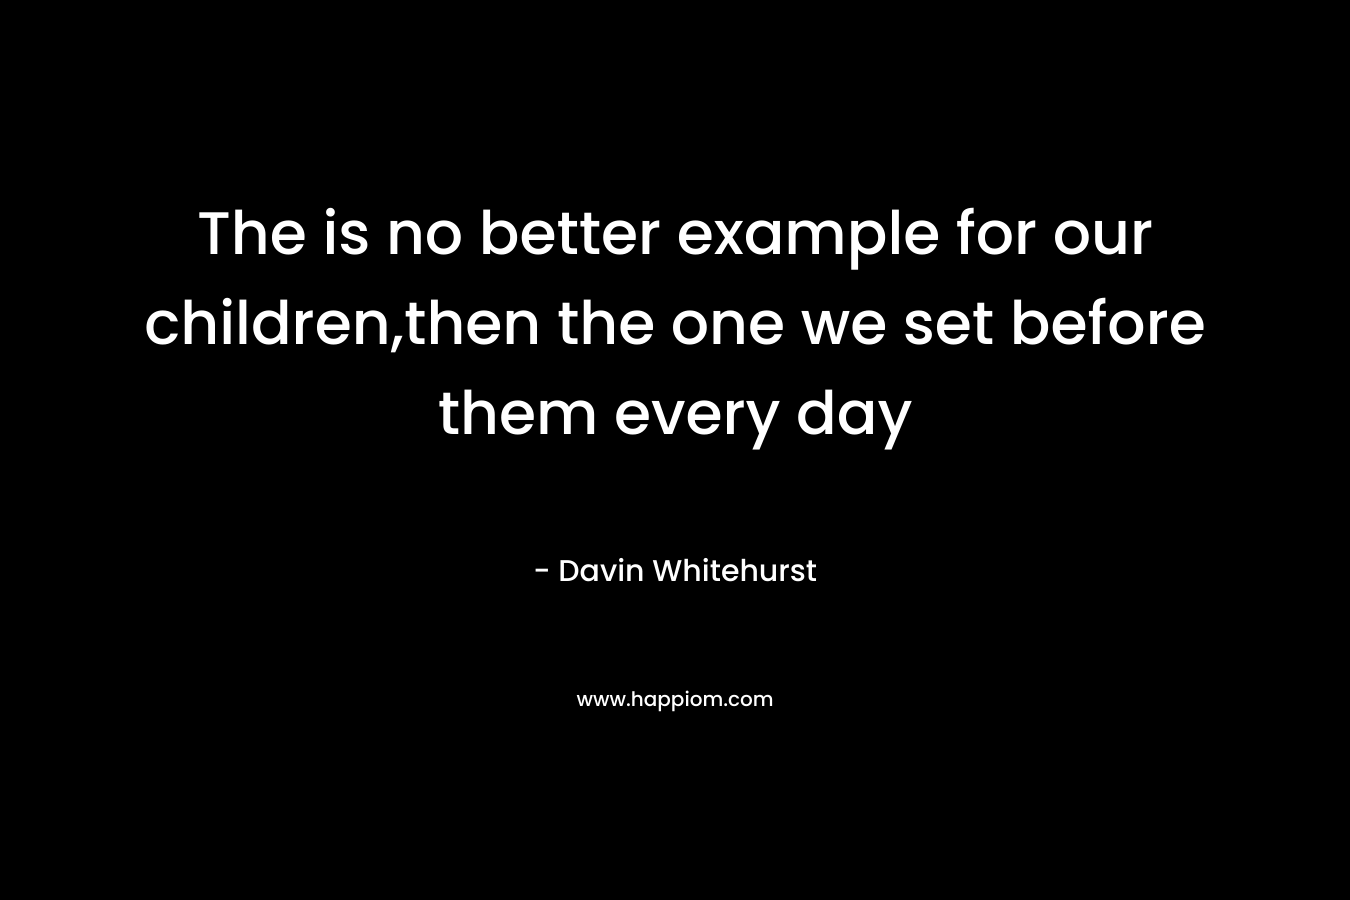 The is no better example for our children,then the one we set before them every day